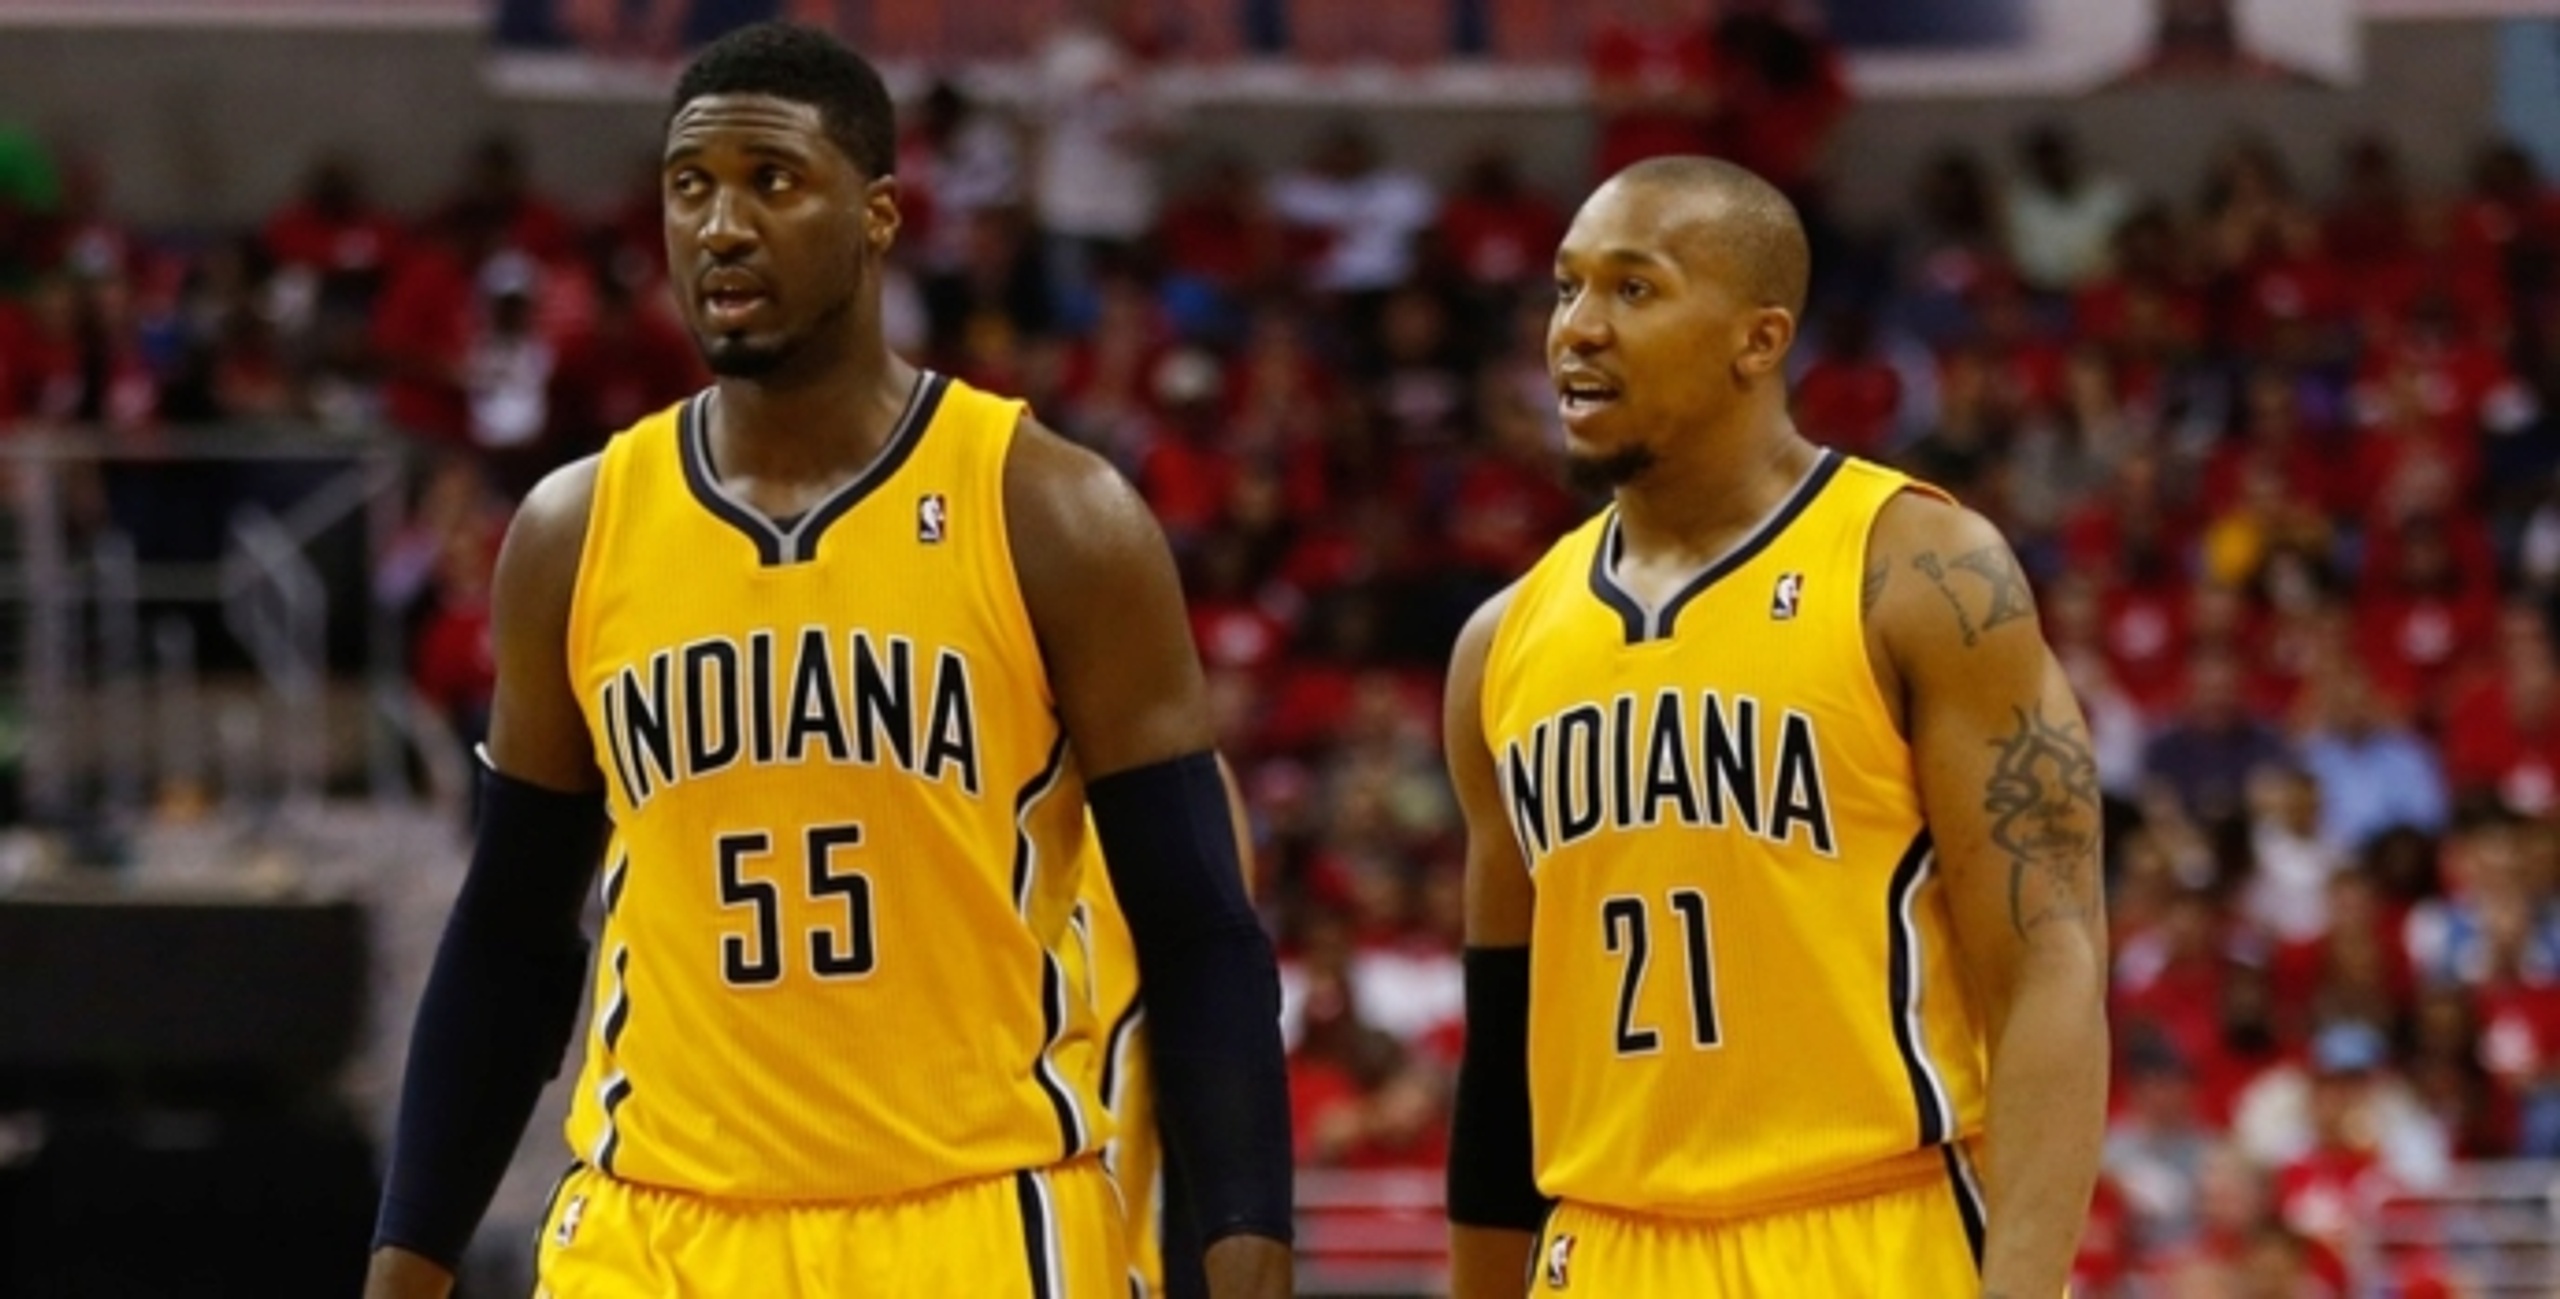 David West opens up about Roy Hibbert's struggles: 'It was all mental'